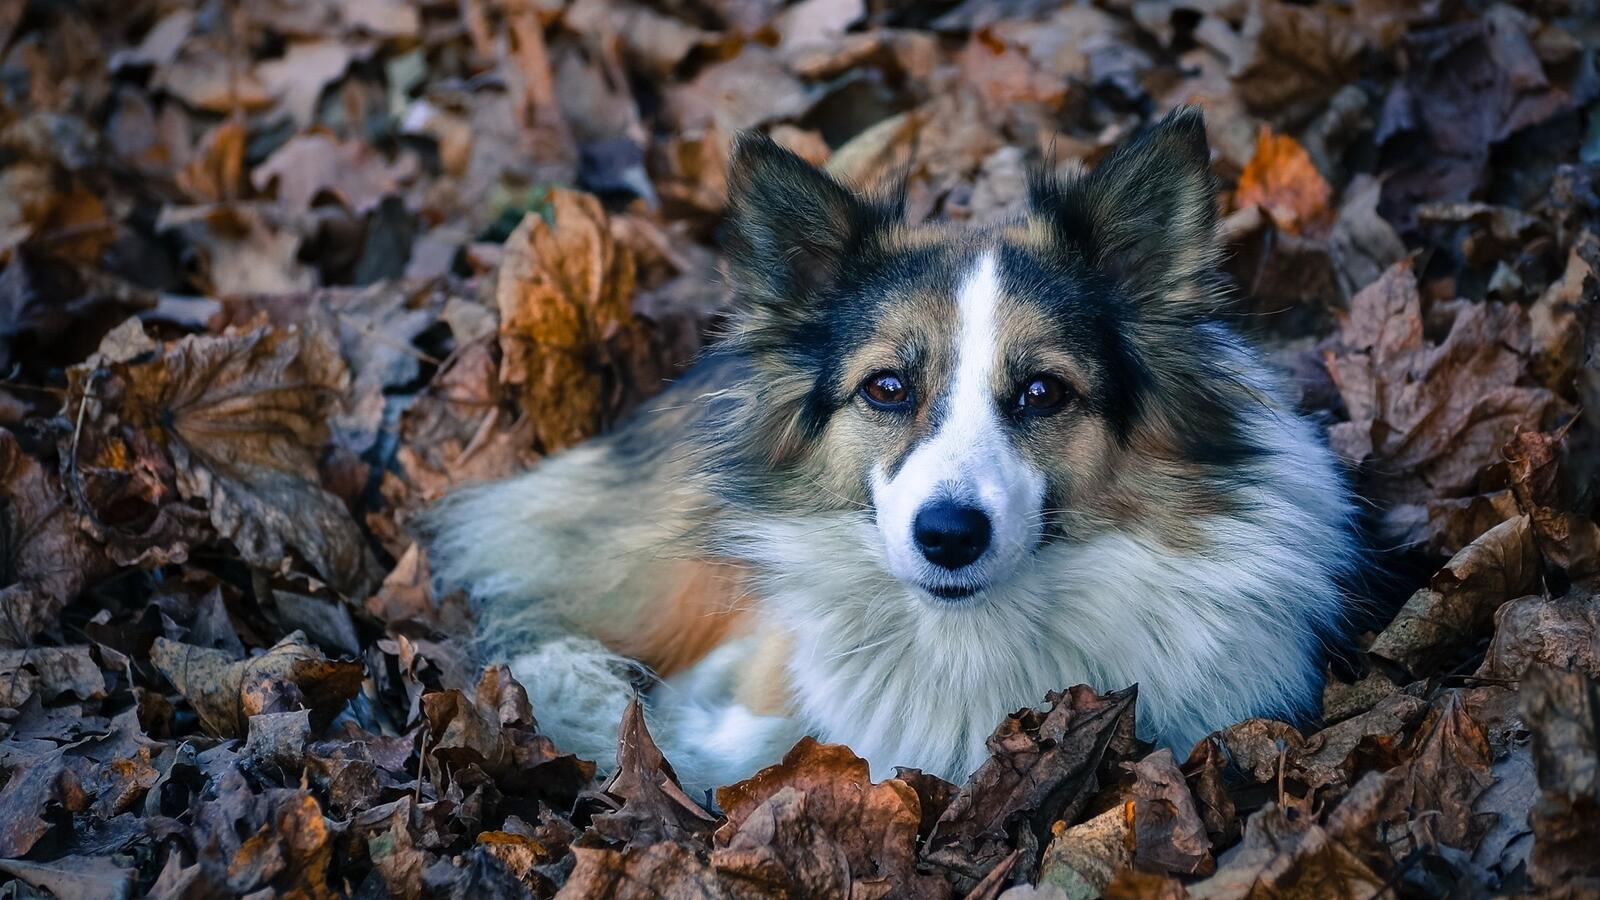 Free photo The dog is lying in dry leaves.